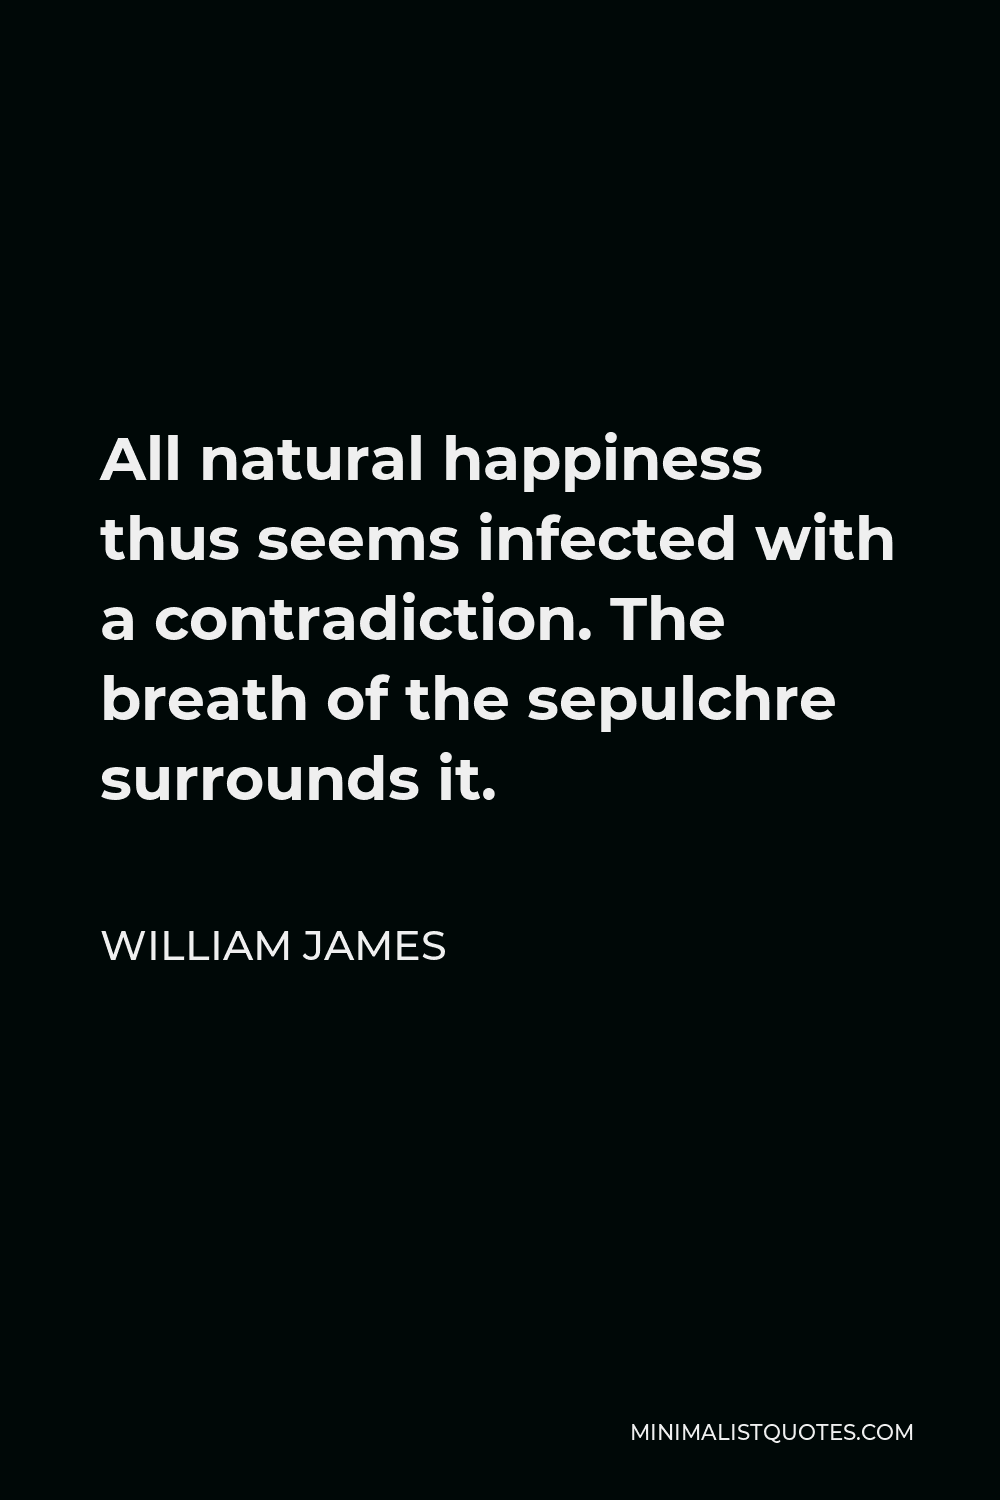 William James Quote - All natural happiness thus seems infected with a contradiction. The breath of the sepulchre surrounds it.